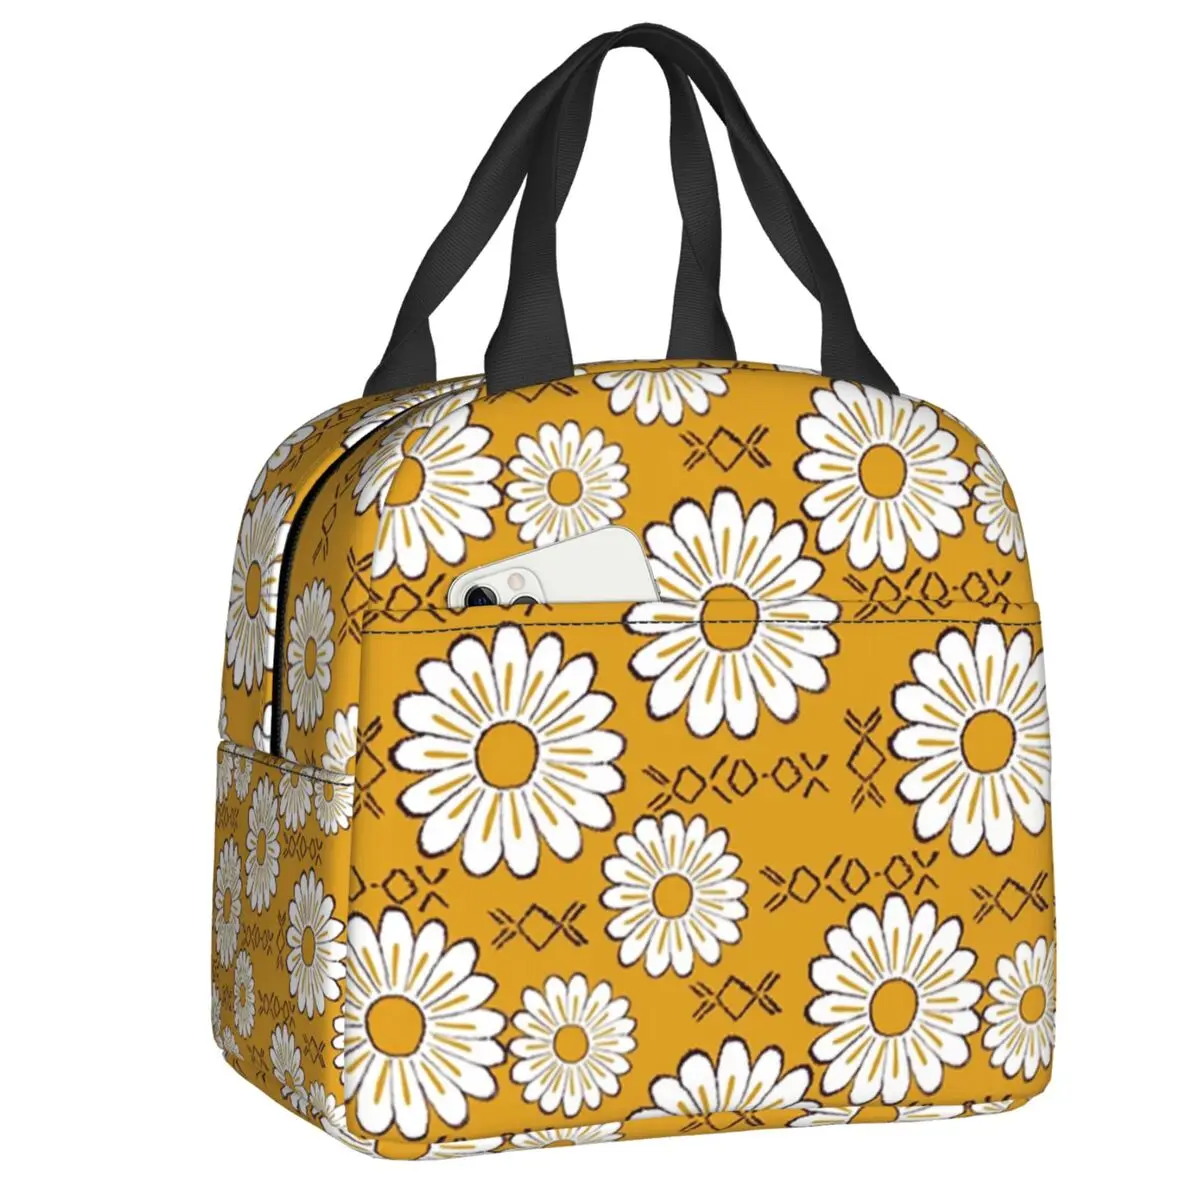 

Harry Sunflower Flower Insulated Lunch Bags Women Hippie Pop Art Floral Pattern Lunch Container Outdoor Picnic Storage Food Box